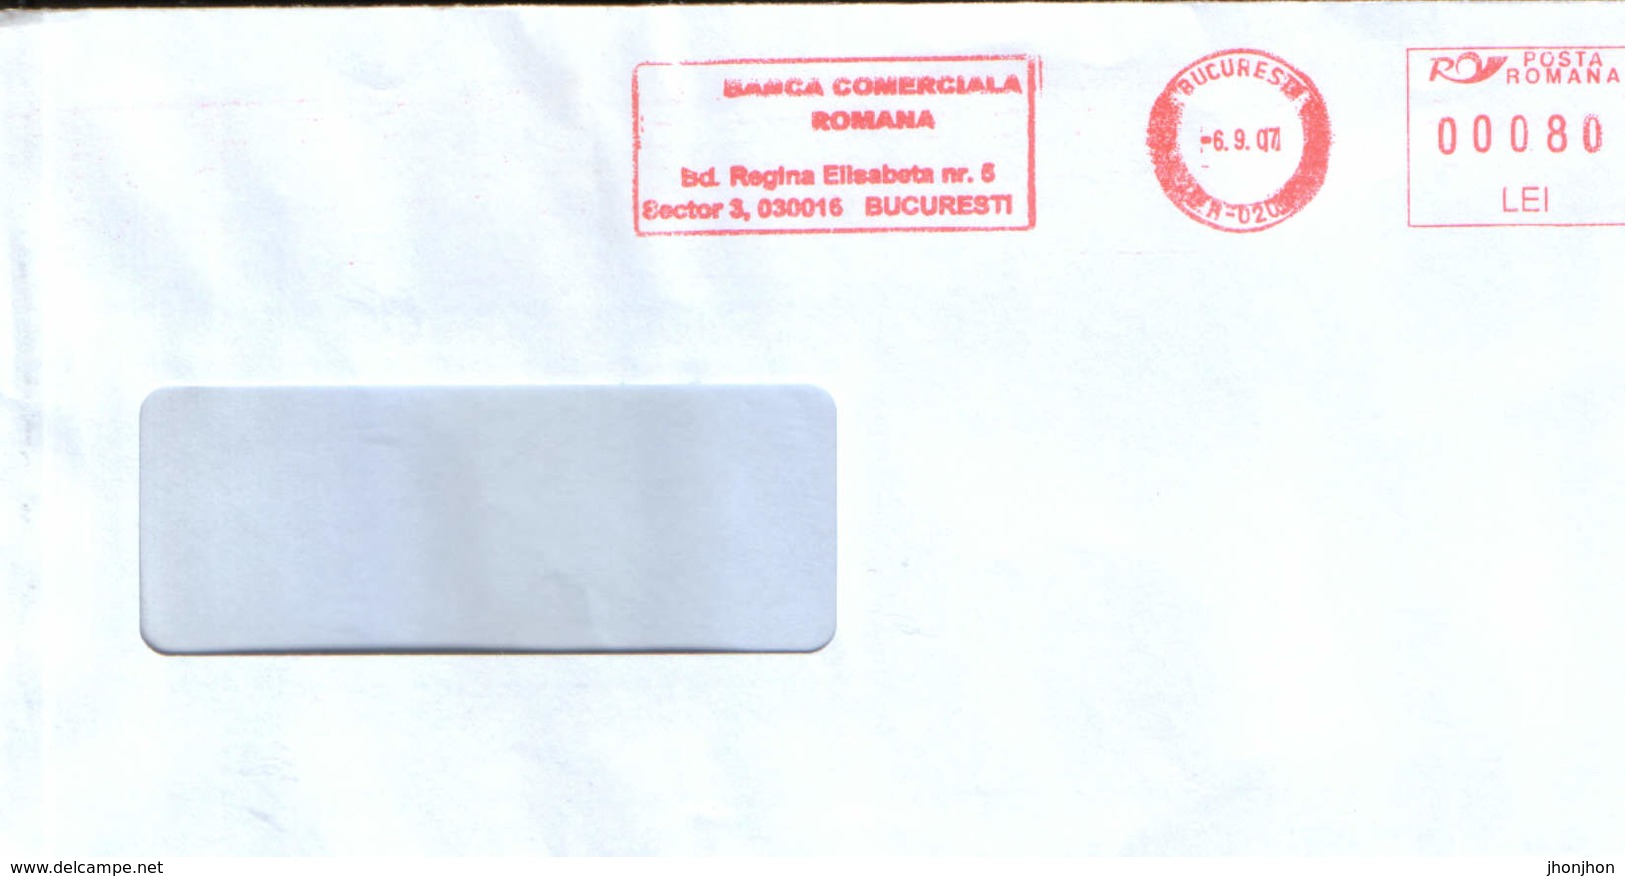 Romania - Cover (Letter) Personalized - Commercial Bank, Circulated In 2007 - Machine Footprints - Frankeermachines (EMA)